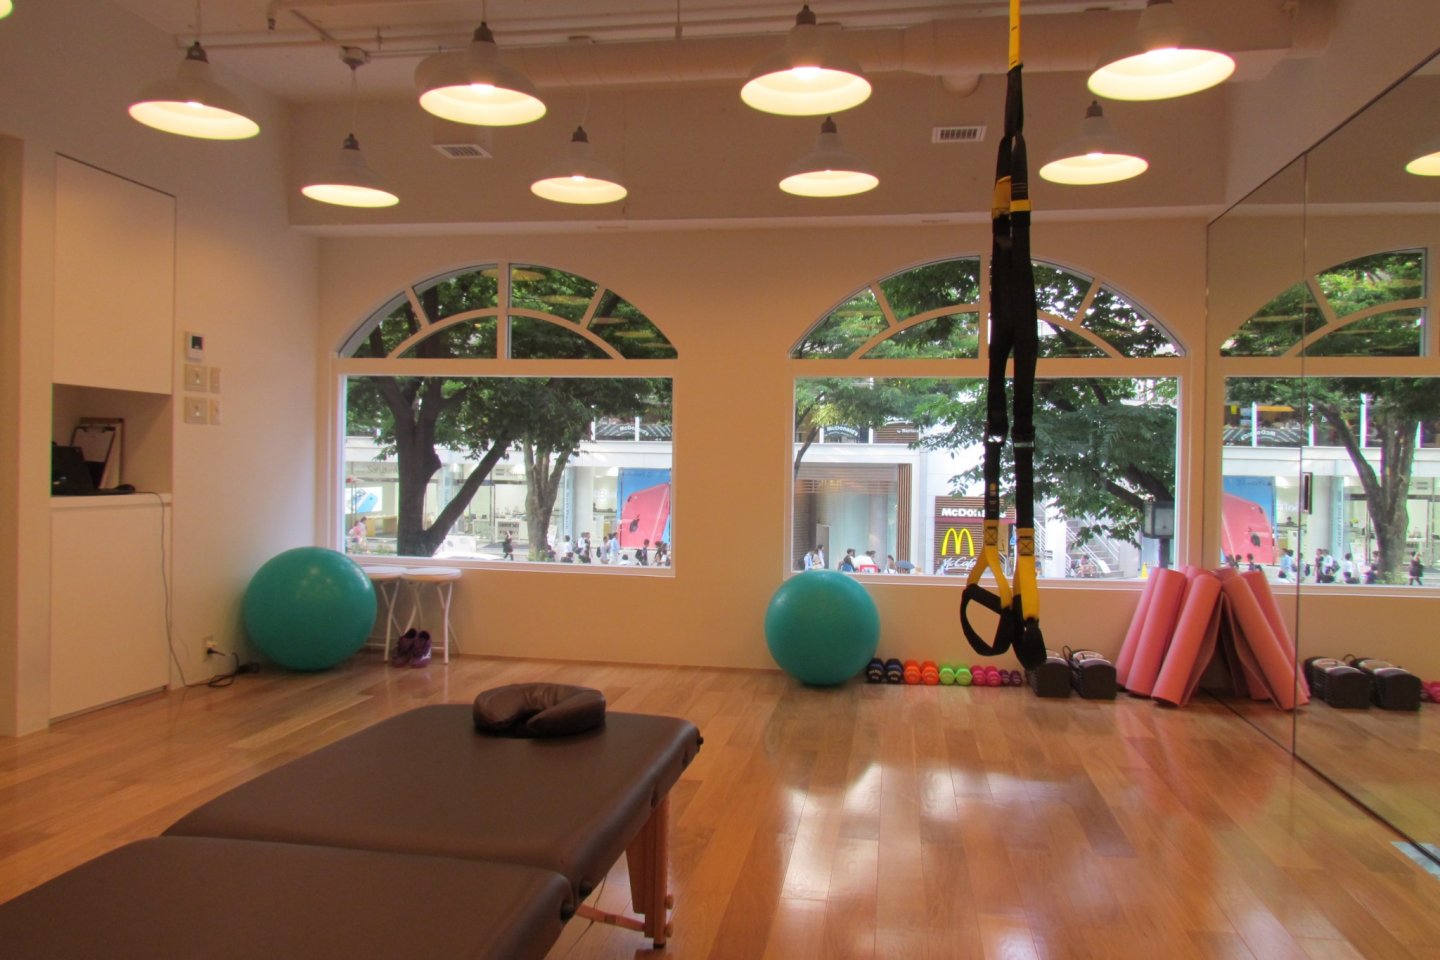 Nohara by Mizuno's fitness studio is bright and airy